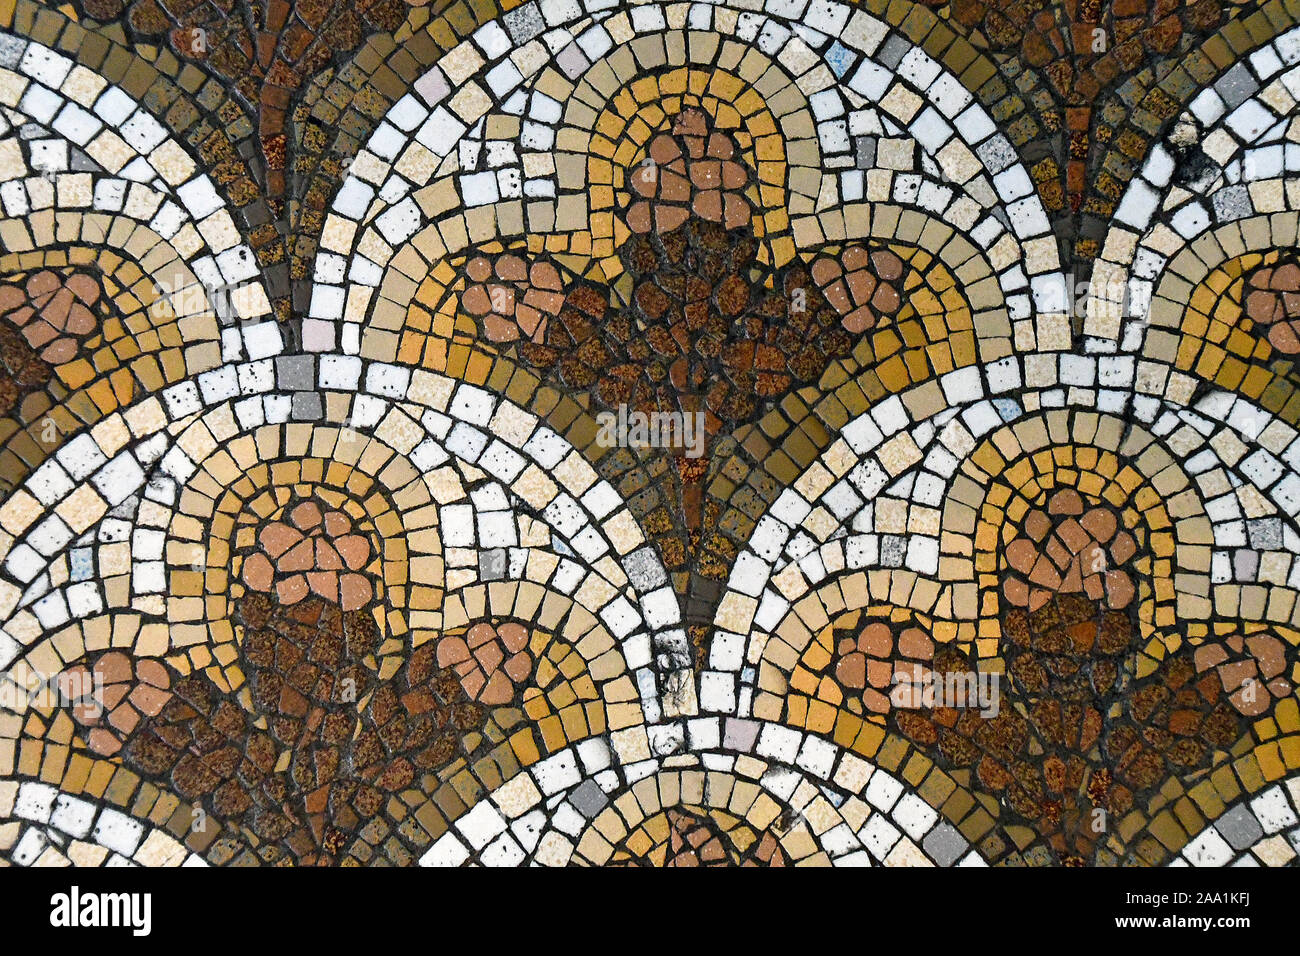 brown and gold ornate mosaic tile floor pattern Stock Photo